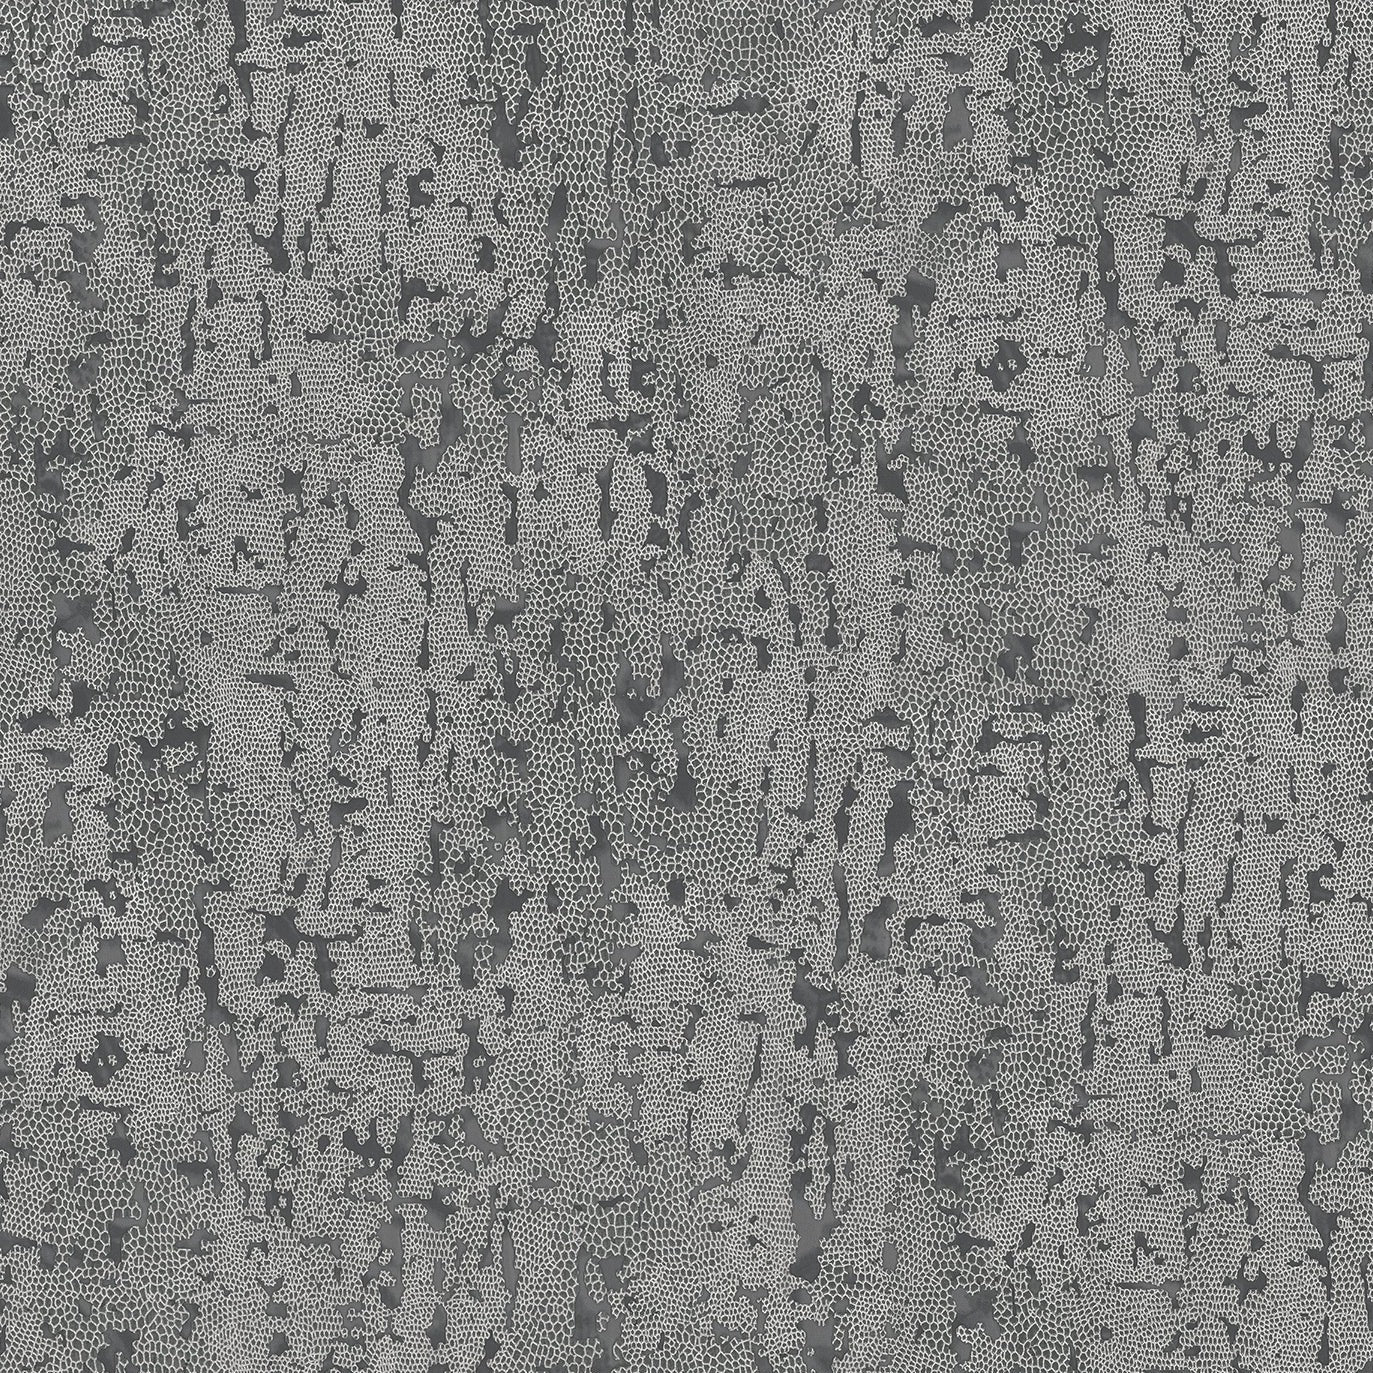 Acquire 2949-60200 Imprint Malawi Dark Brown Leather Texture Brown A-Street Prints Wallpaper